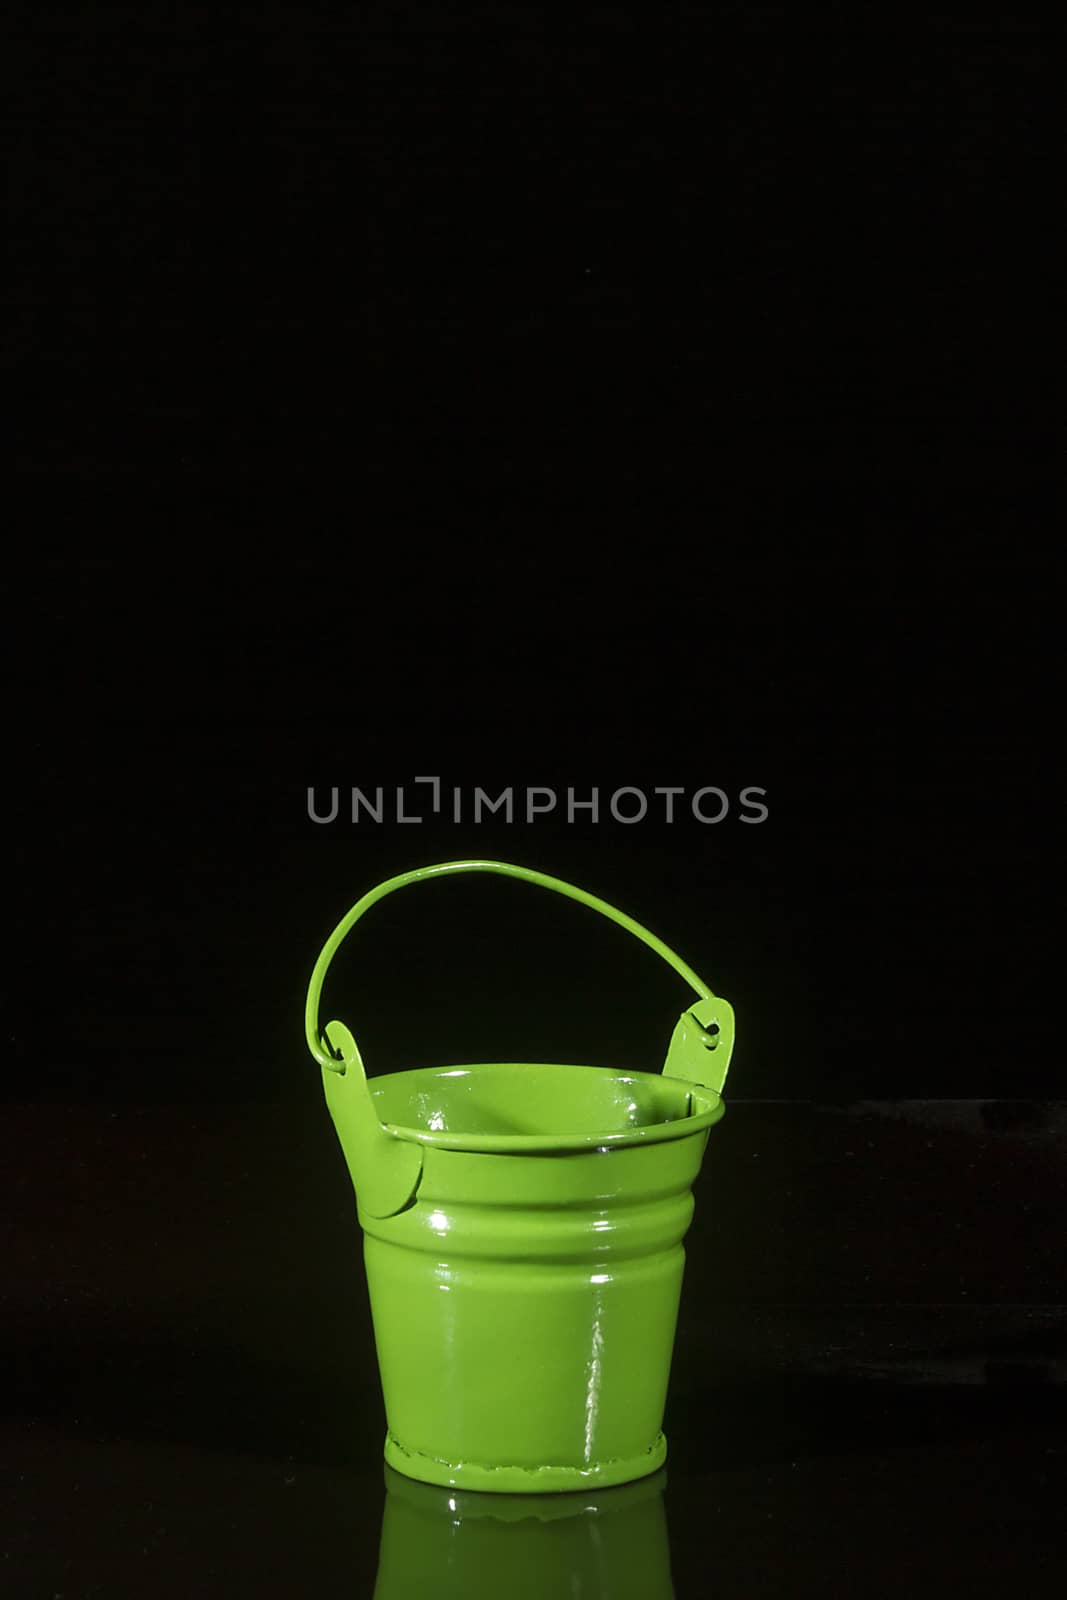 Small green bucket on a black reflective background